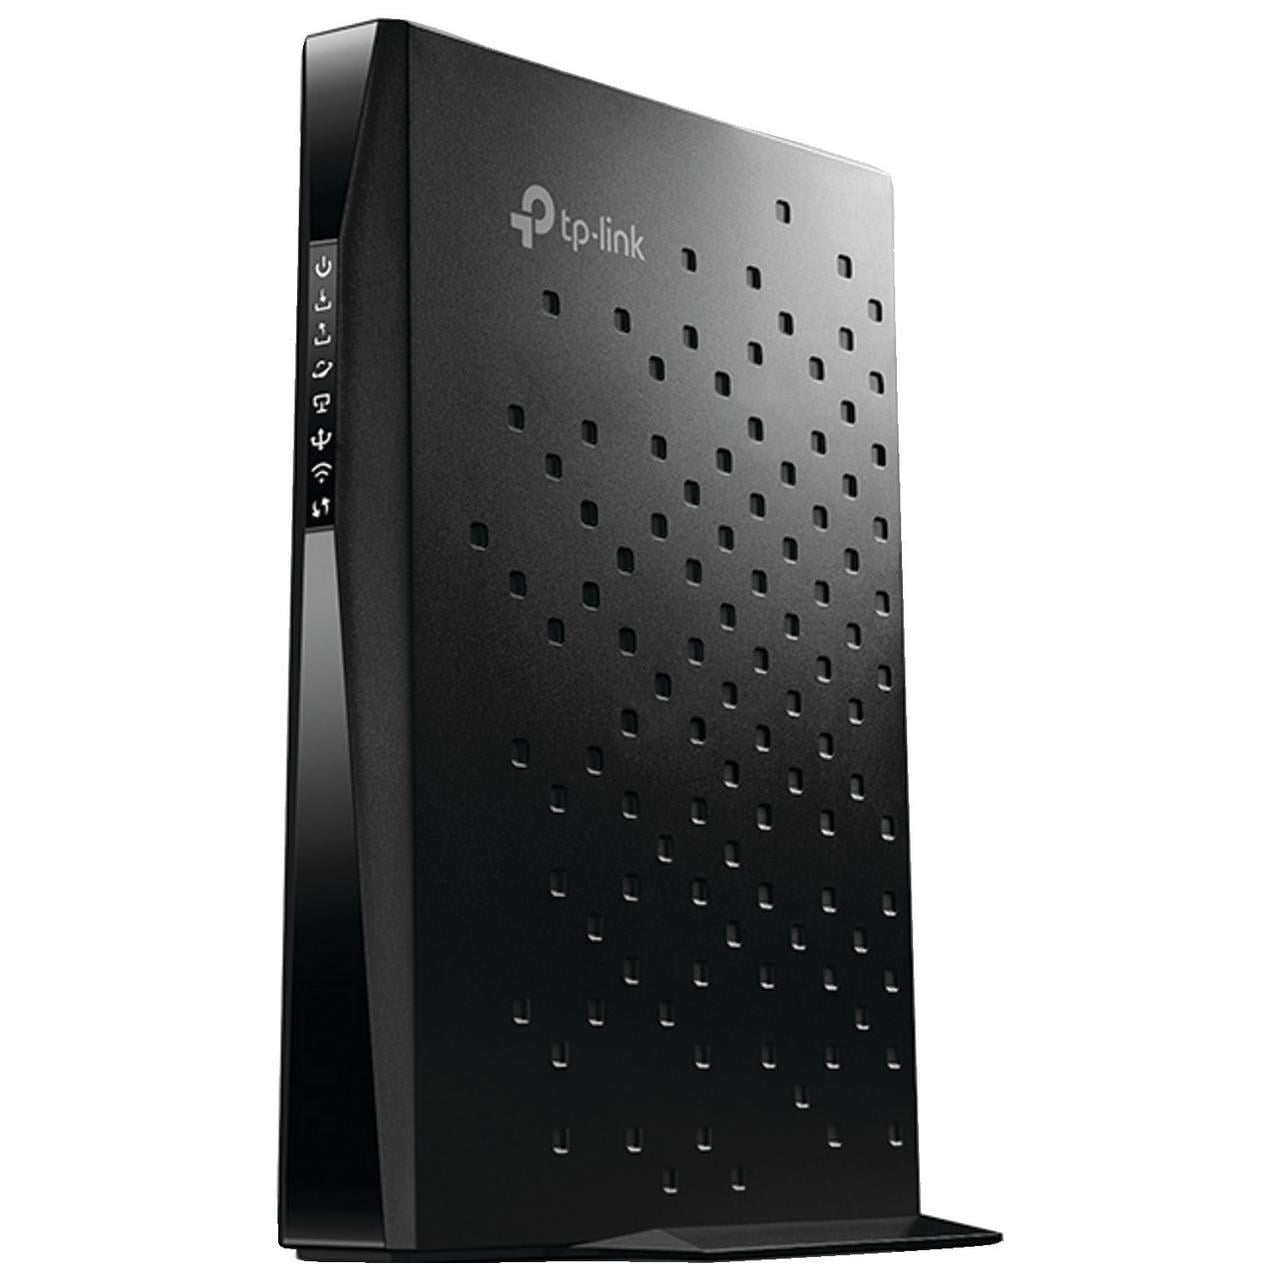 Max Download Speeds Up to 1000Mbps Up to 1900Mbps Wi-Fi Speeds Spectrum and more TP-Link Archer CR1900 24x8 DOCSIS3.0 AC1900 Wireless Wi-Fi Cable Modem Router Certified for Comcast XFINITY 